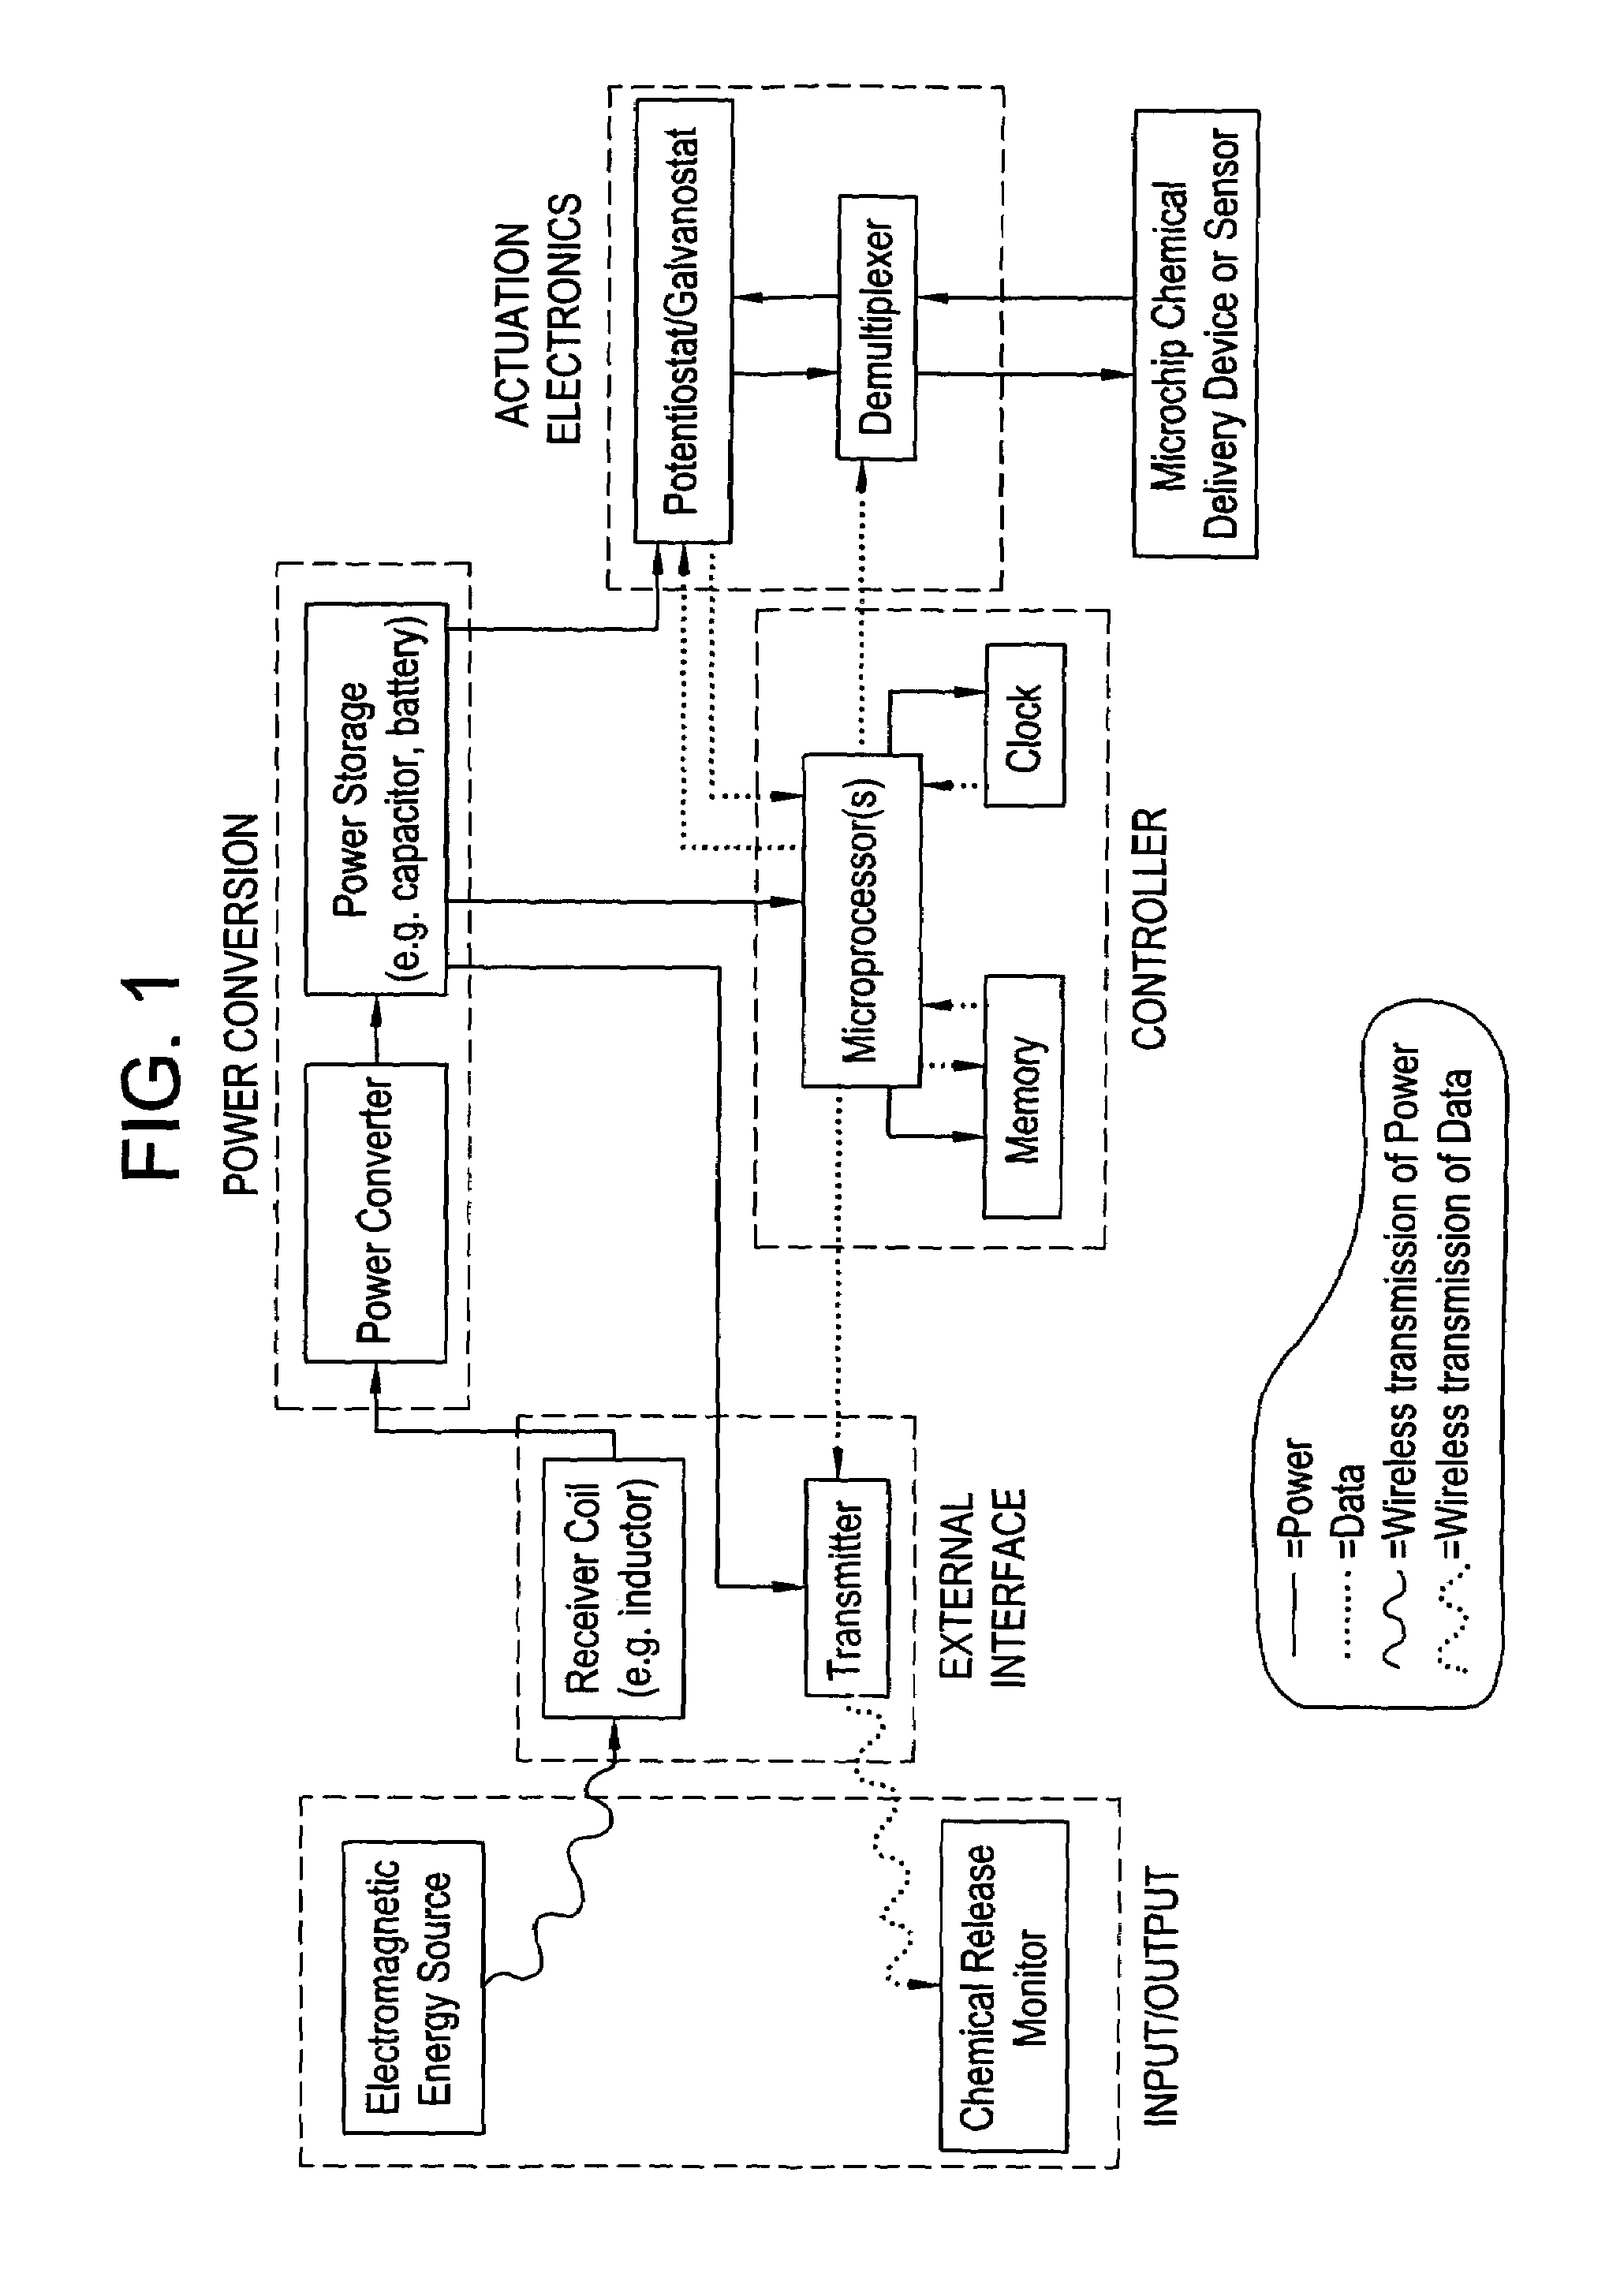 Microchip reservoir devices using wireless transmission of power and data